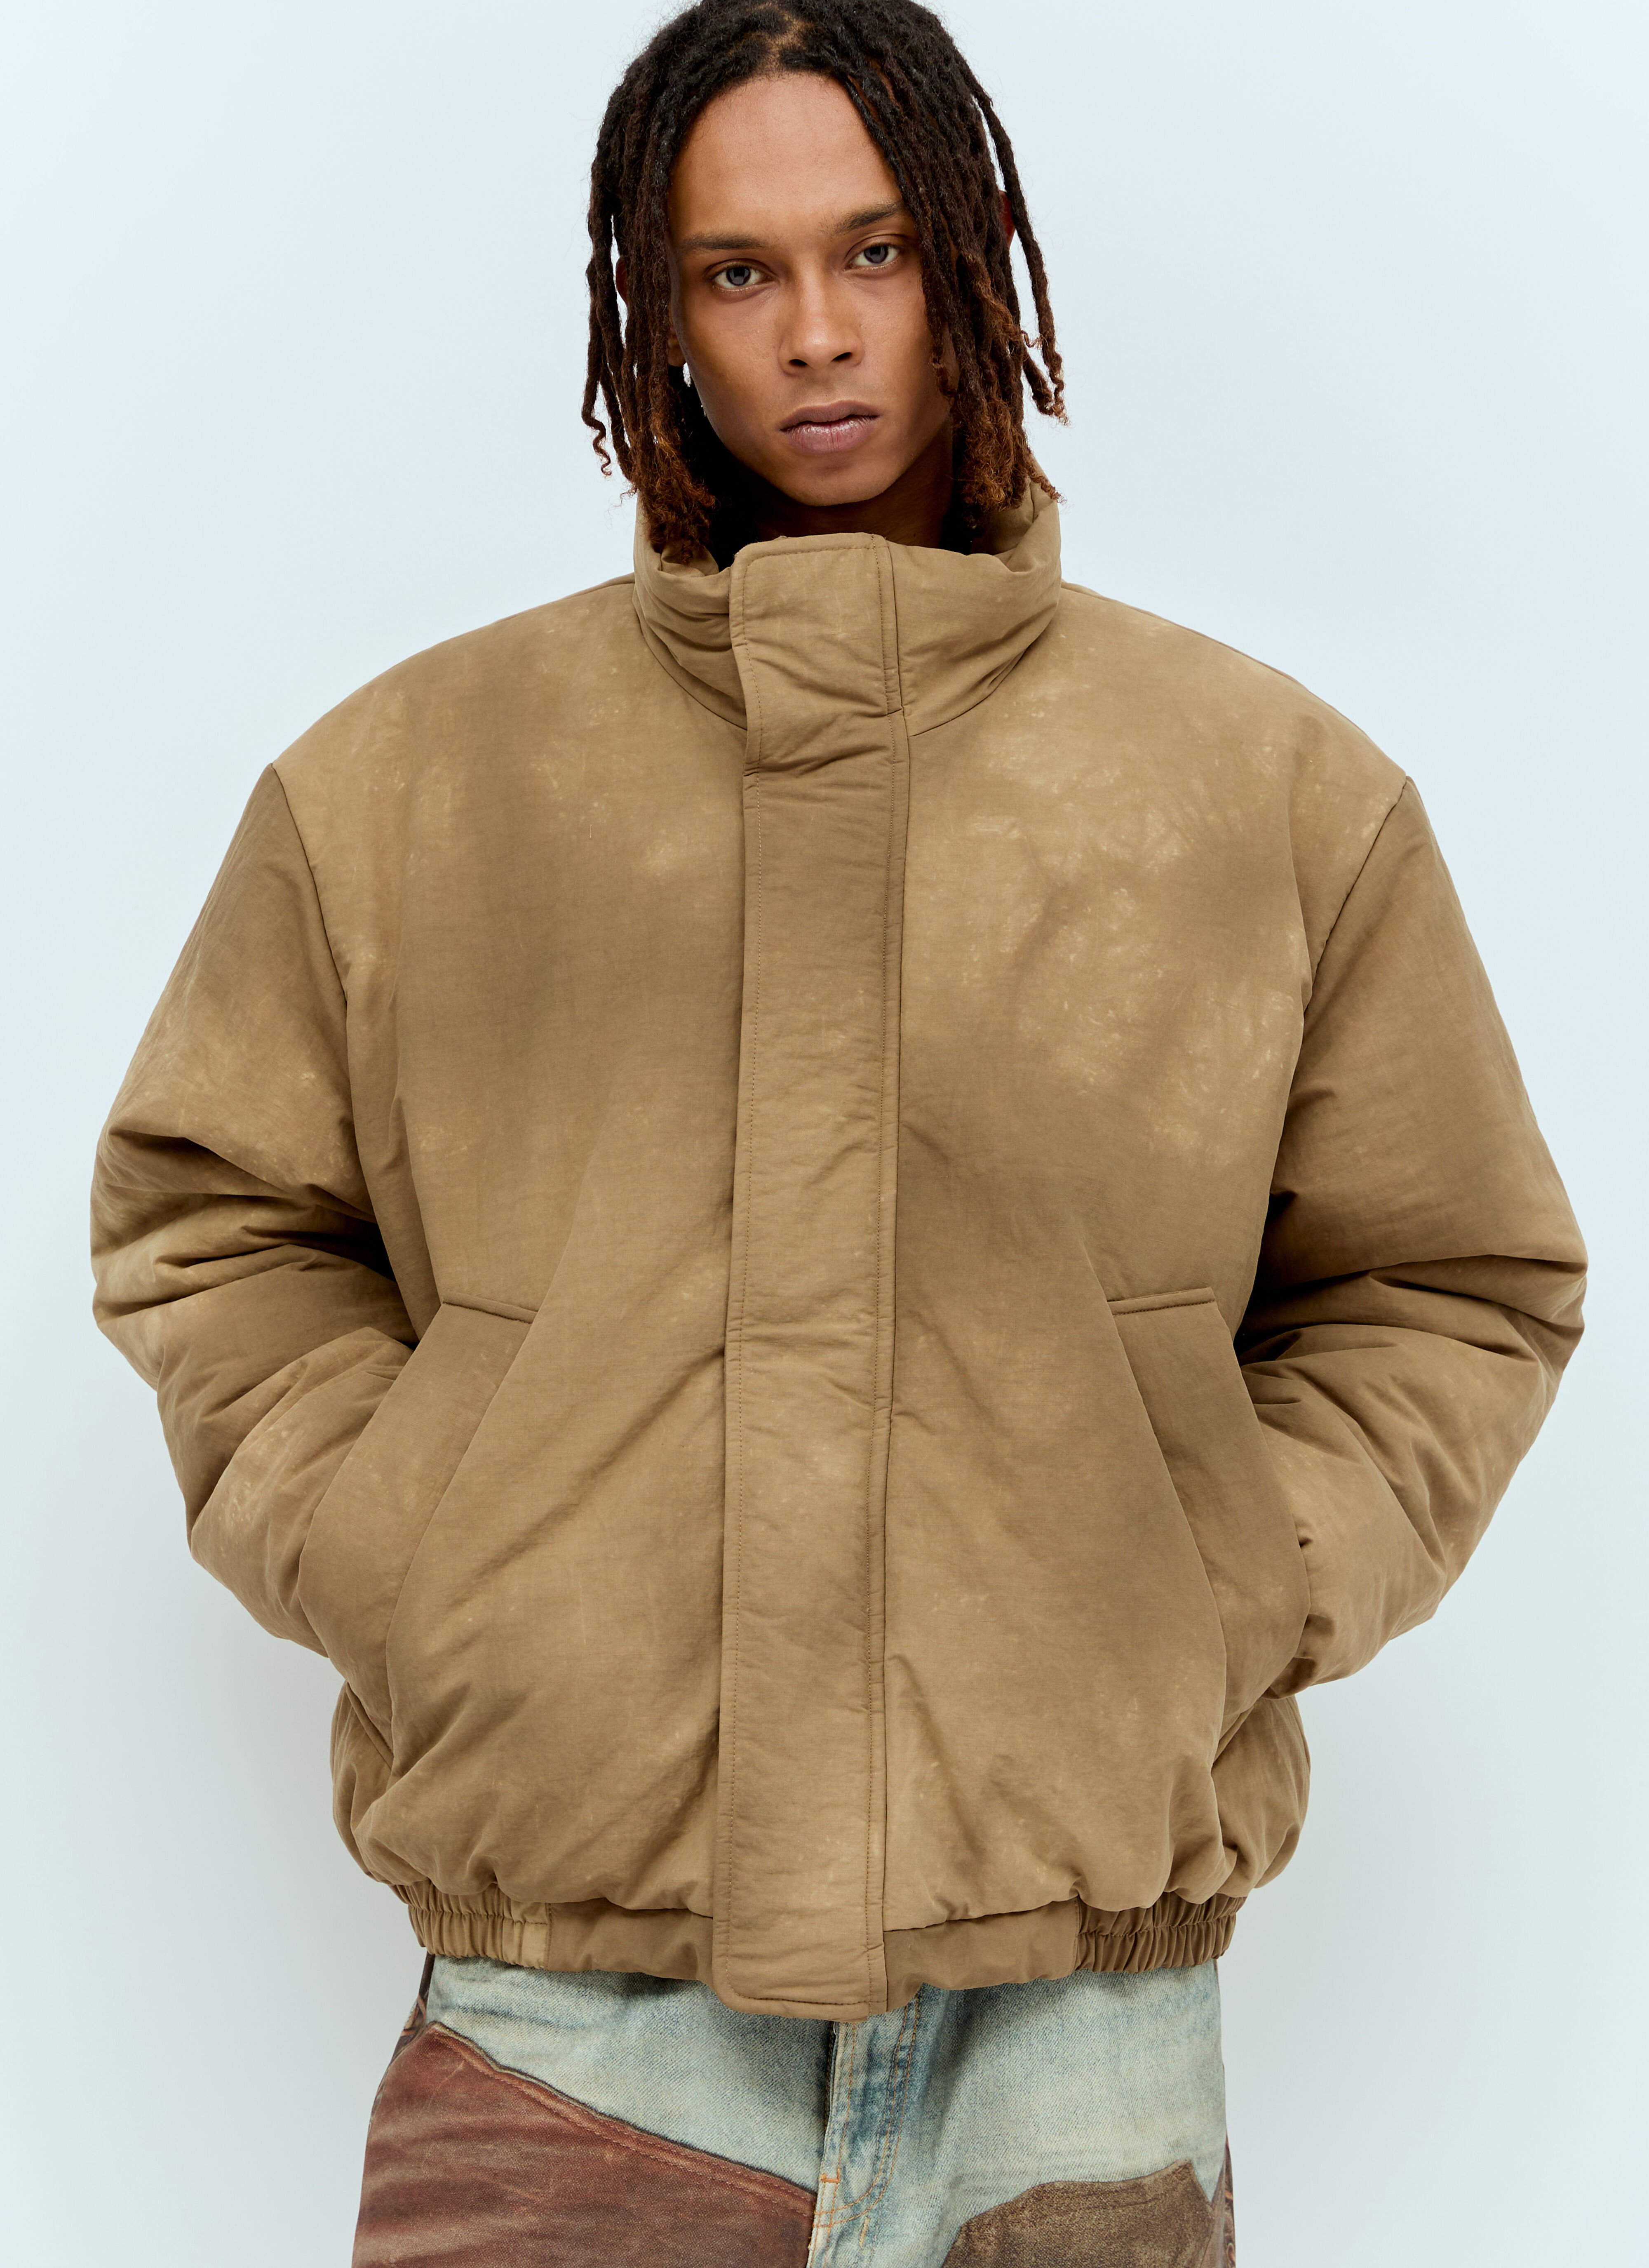 Moncler x Roc Nation designed by Jay-Z Dyed Puffer Jacket Beige mrn0156001